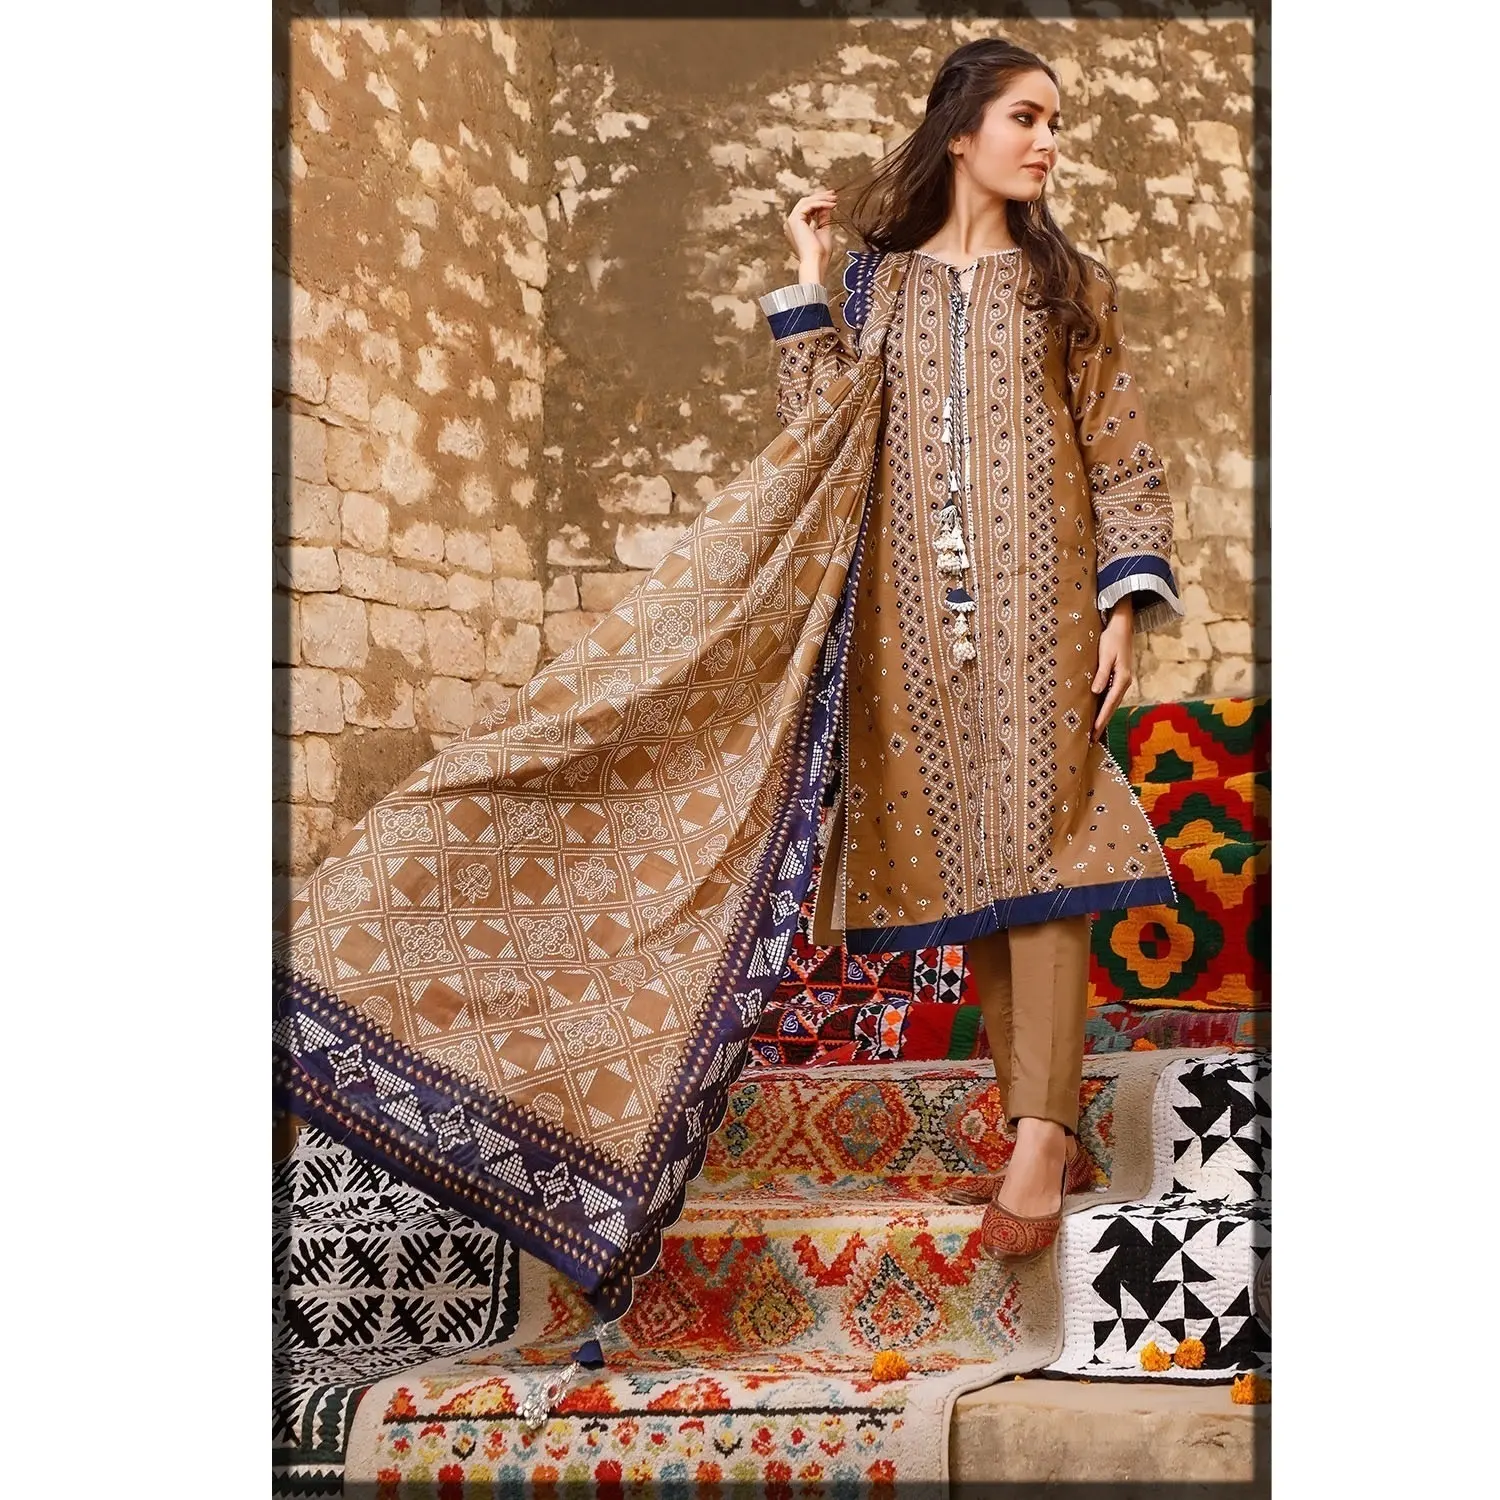 brown and blue beautiful new women dress lawn nice color hot selling Pakistan ladies suit India summer wear